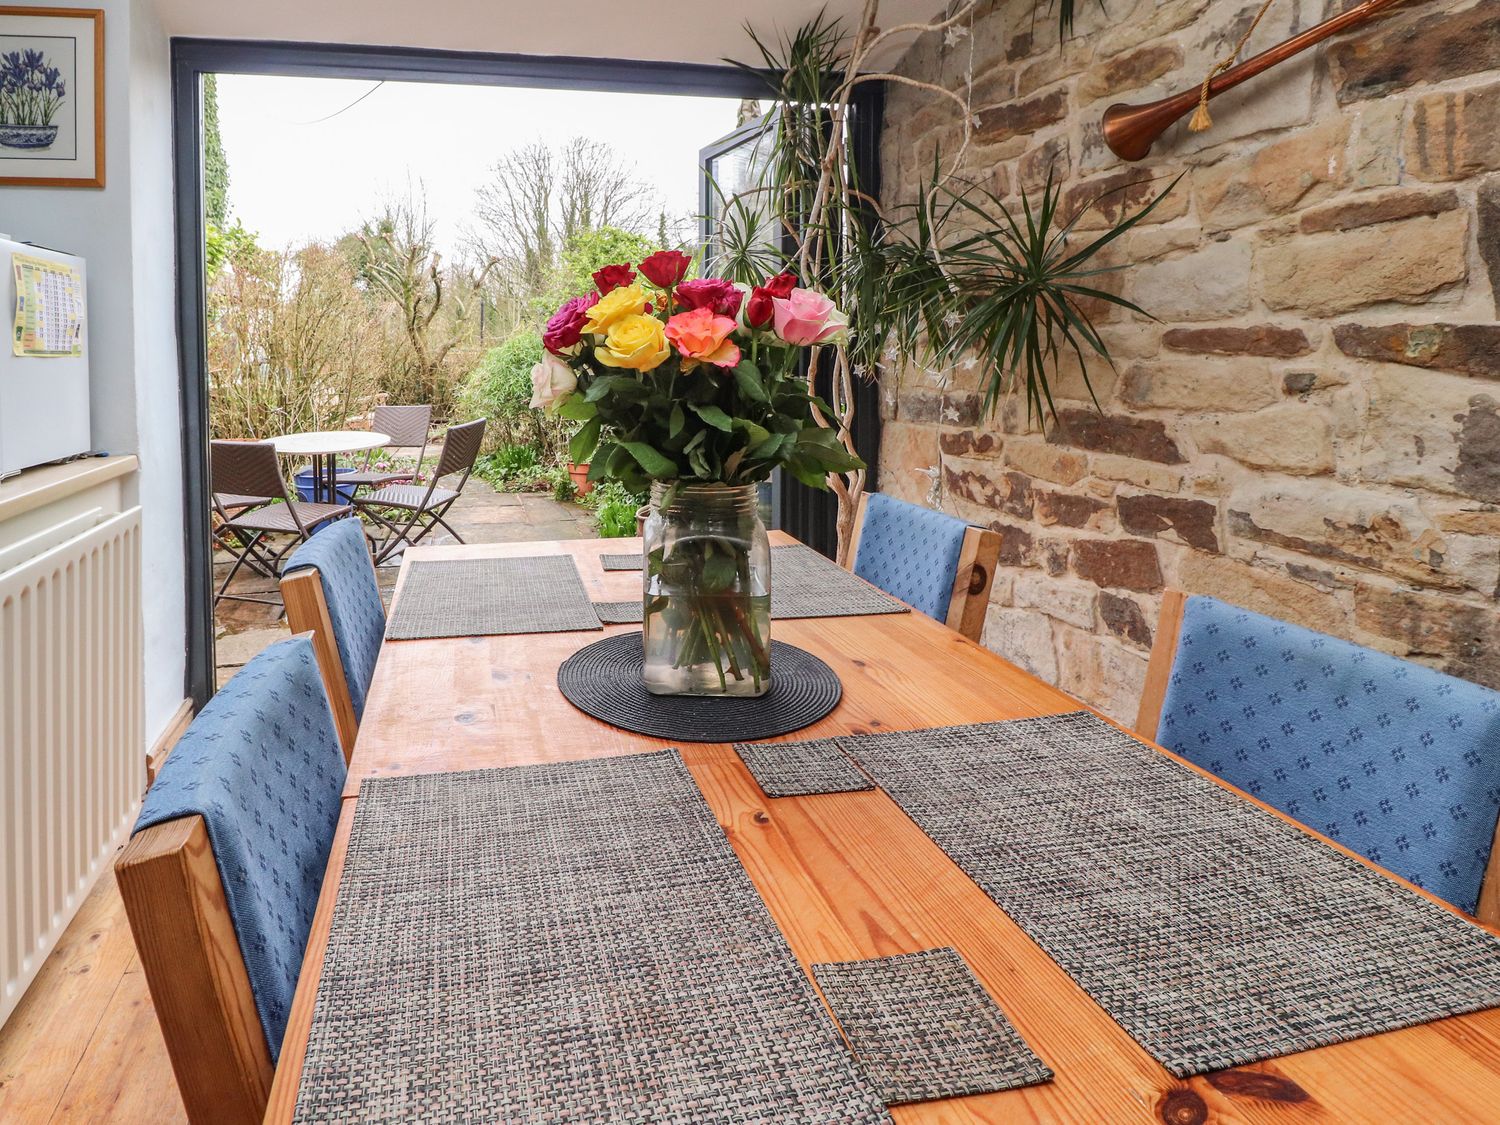 Ribble Valley Cottage - Lake District - 1152403 - photo 1